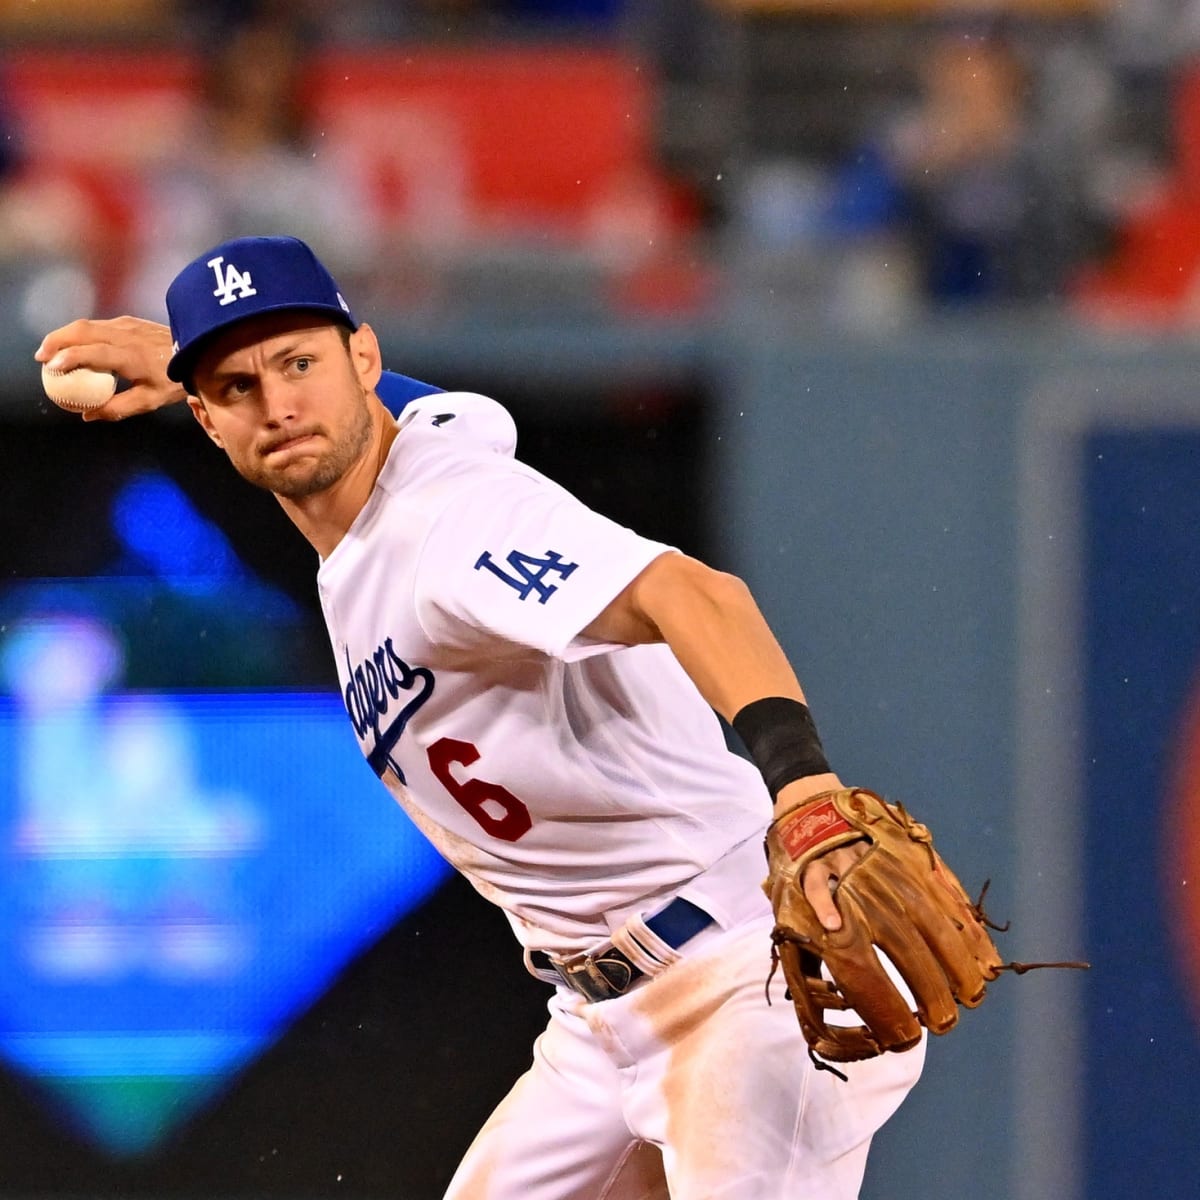 Los Angeles Dodgers on X: Your All-Star finalist, @treavturner